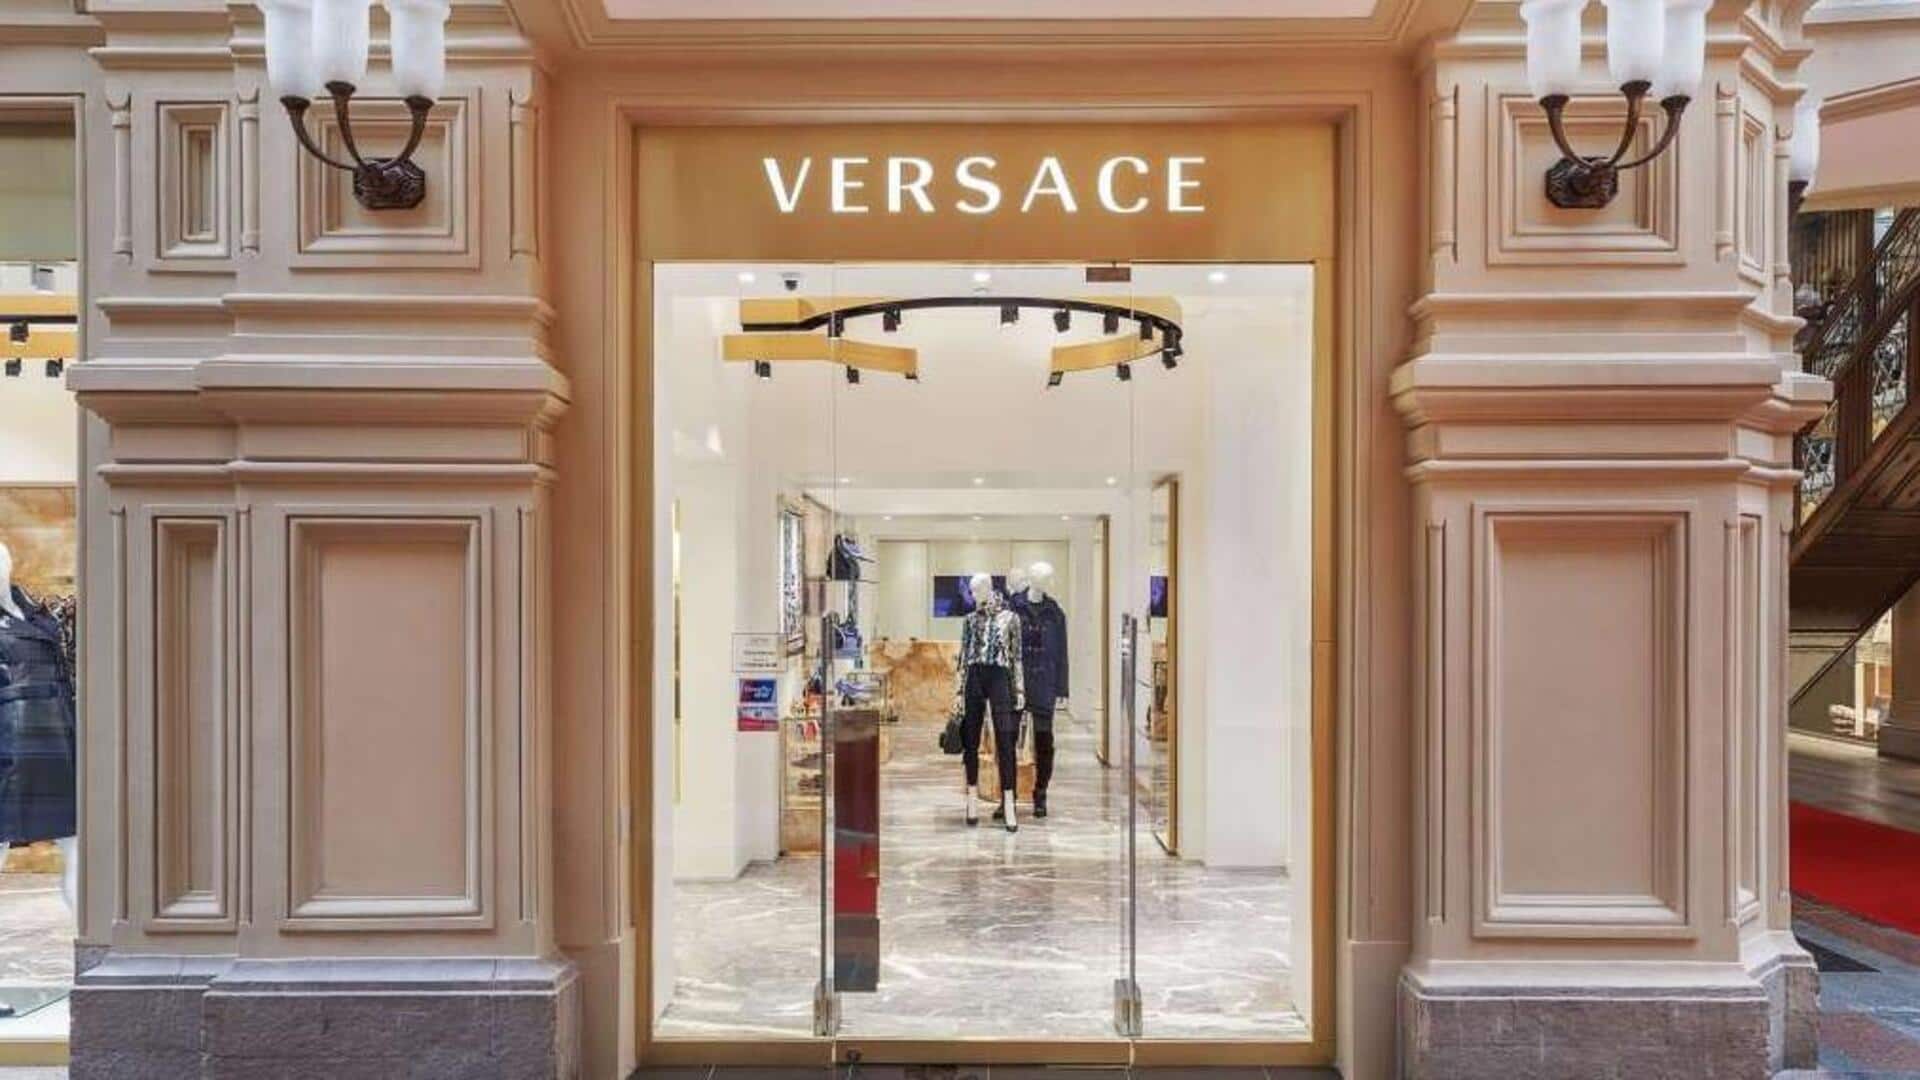 Tapestry is acquiring Versace's parent company Capri for $8.5 billion